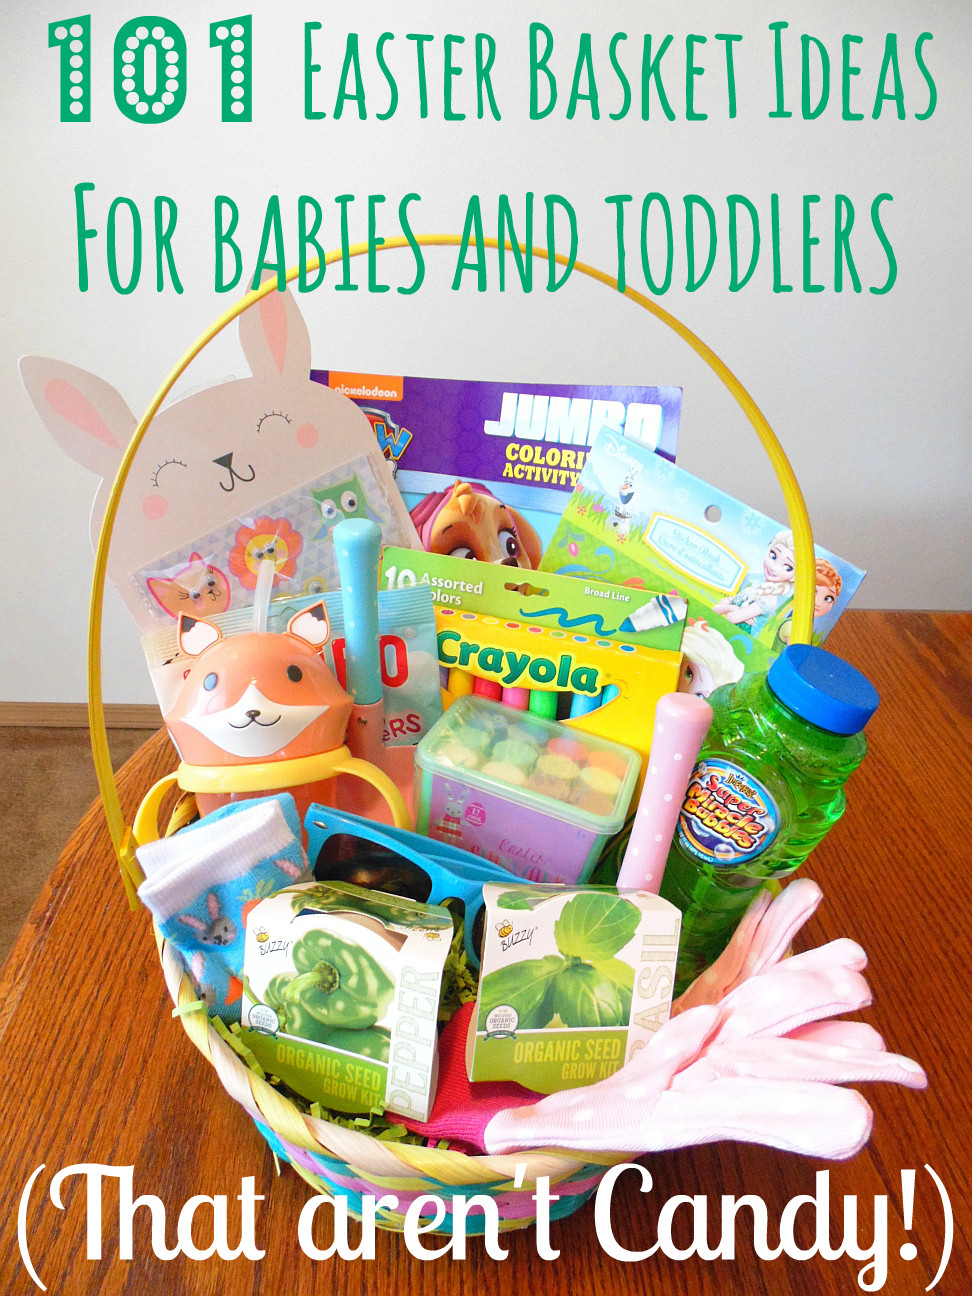 Easter Basket Ideas For 10 Year Old Boy
 101 Easter Basket Ideas for Babies and Toddlers That Aren